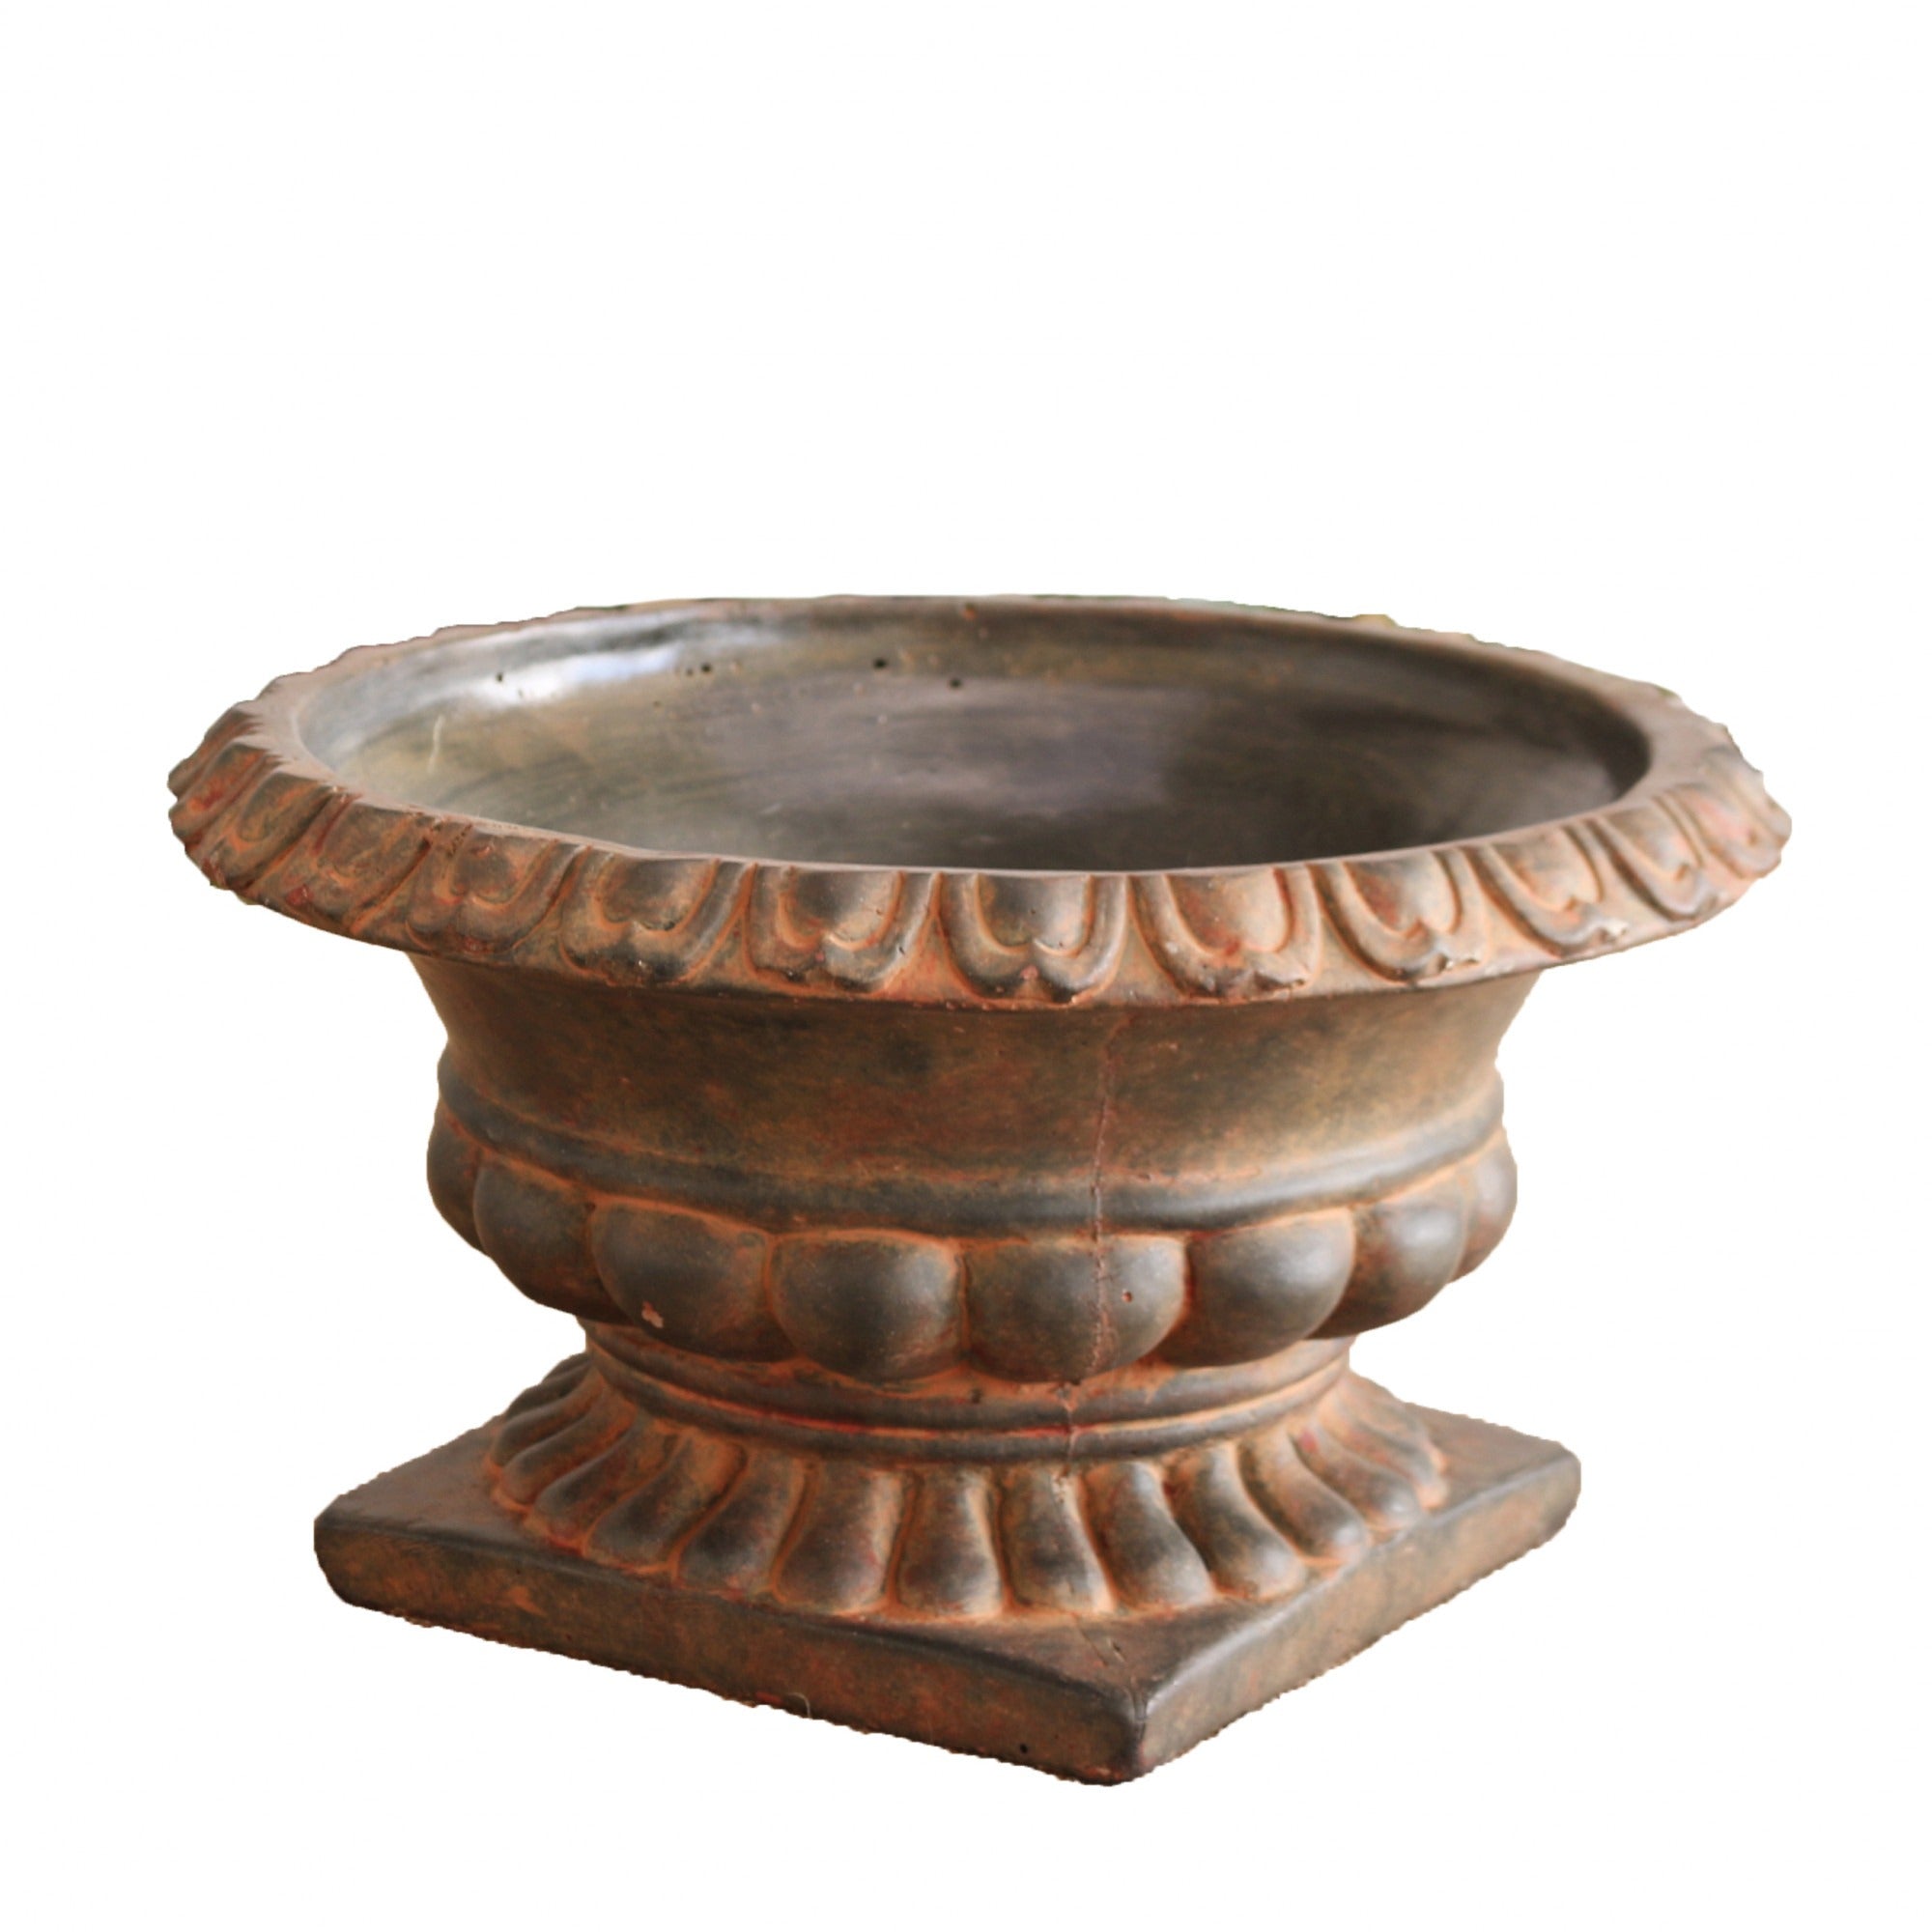 View French Urn Cement Pot 16cm information